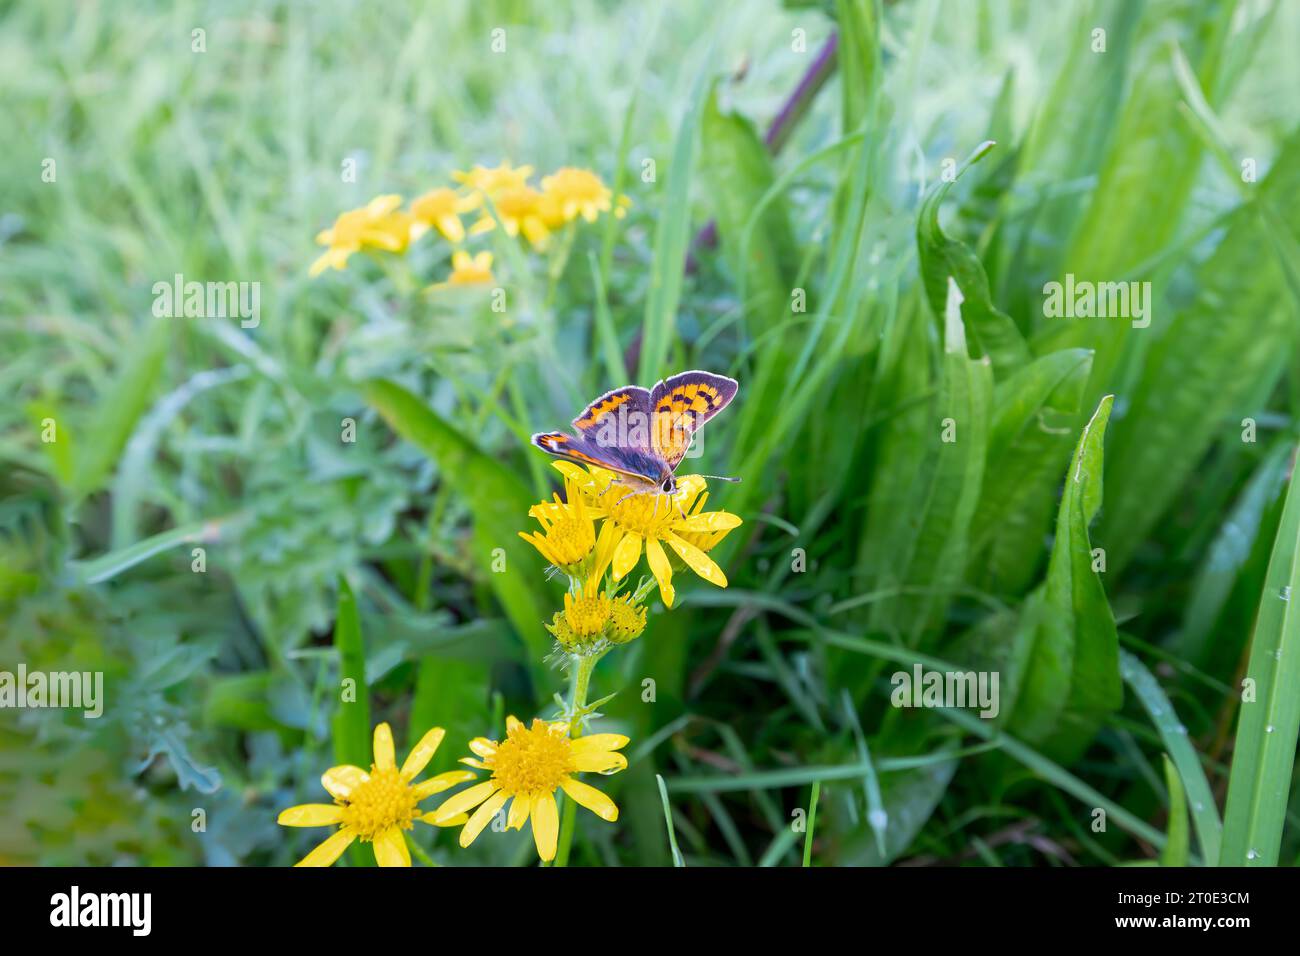 Close up of a Small Copper, Lycaena phlaeas, on flower of Marsh Ragwort, Jacobaea aquatica, against background with leaf rosette of Small Plantain, Pl Stock Photo